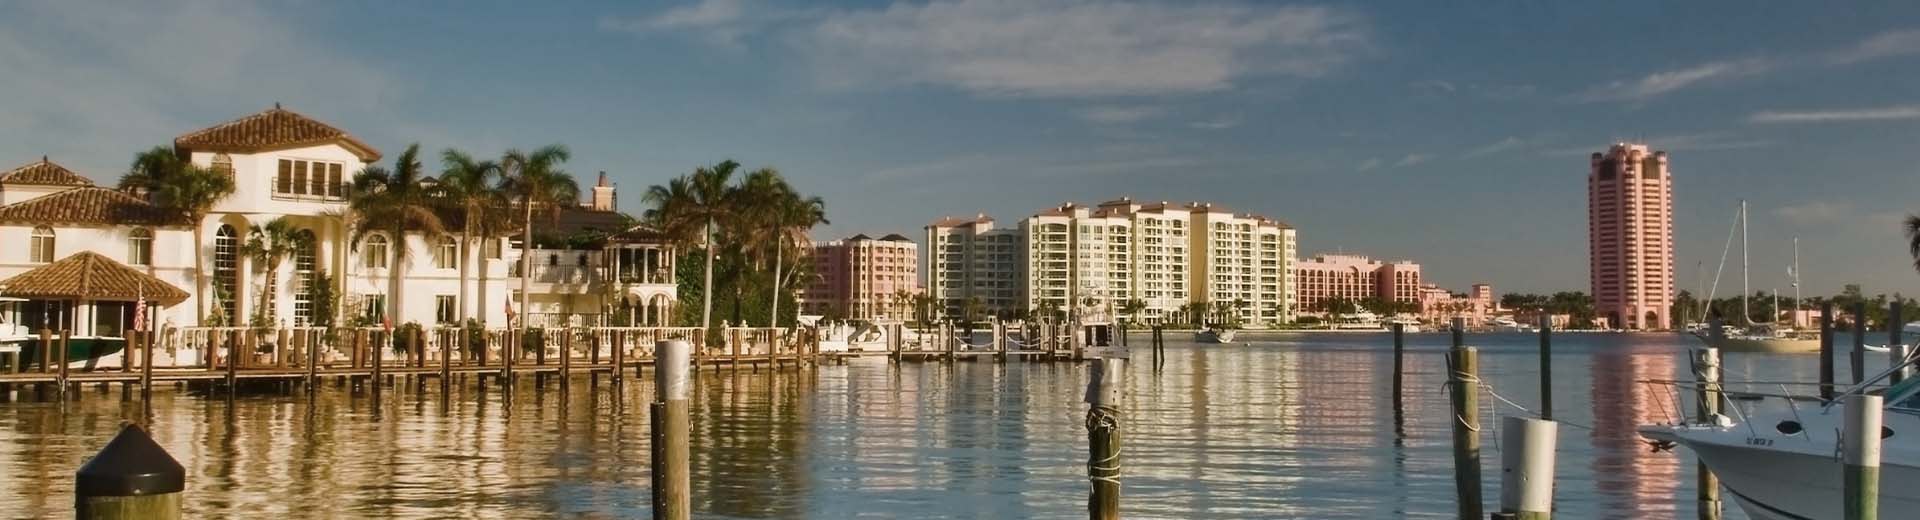 Dark waters reflect the hotels lined in the background in Boca Raton. 